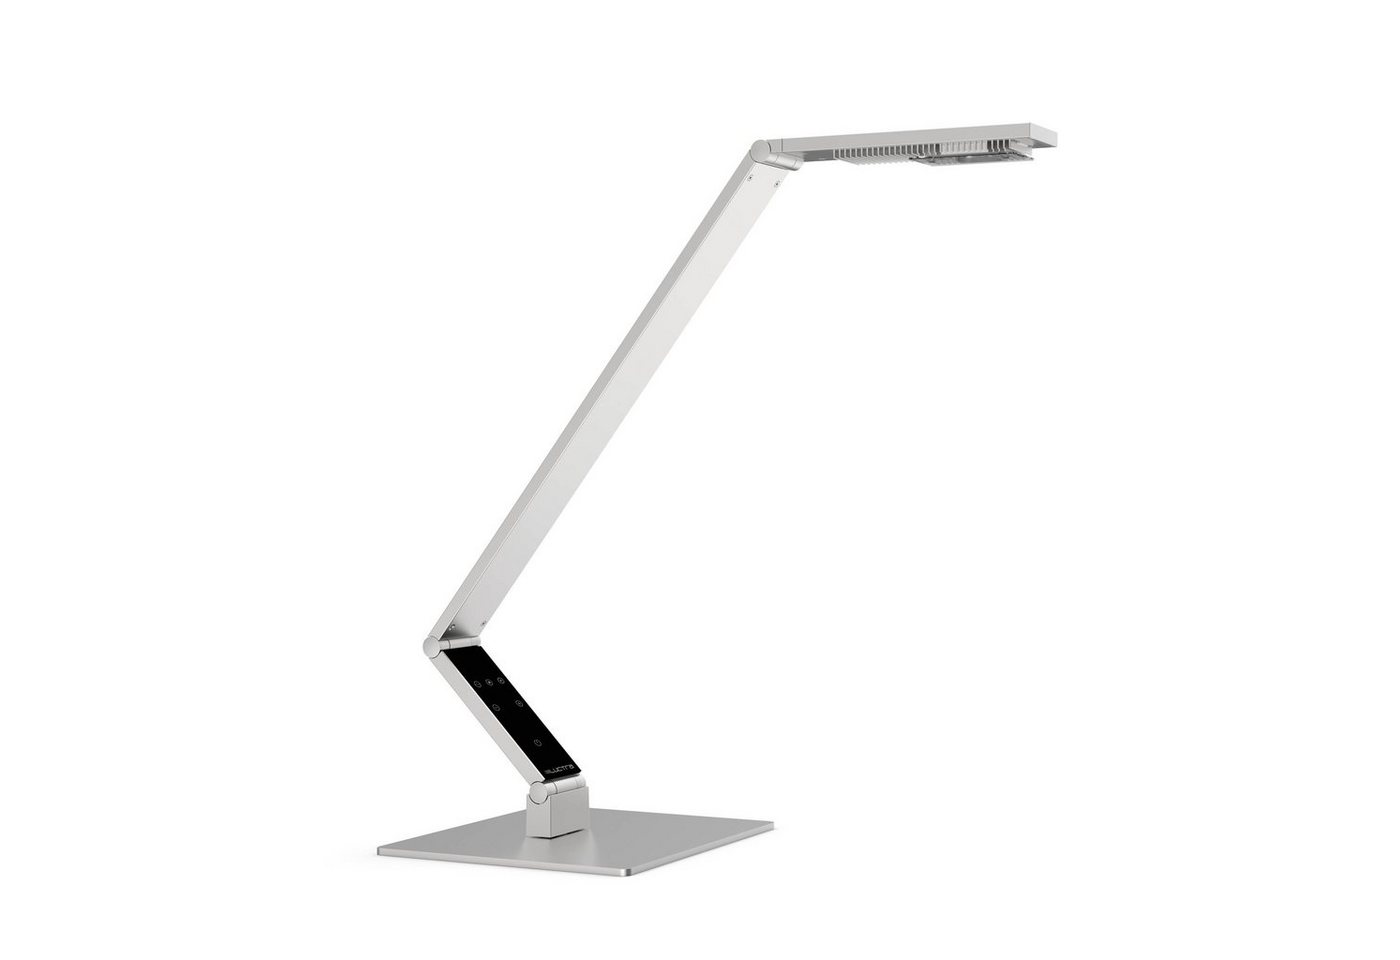 LUCTRA Tischleuchte TABLE LINEAR BASE, LUCTRA Table Linear Base Schreibtischlampe LED Dimmbar, schwarz, LED S von LUCTRA